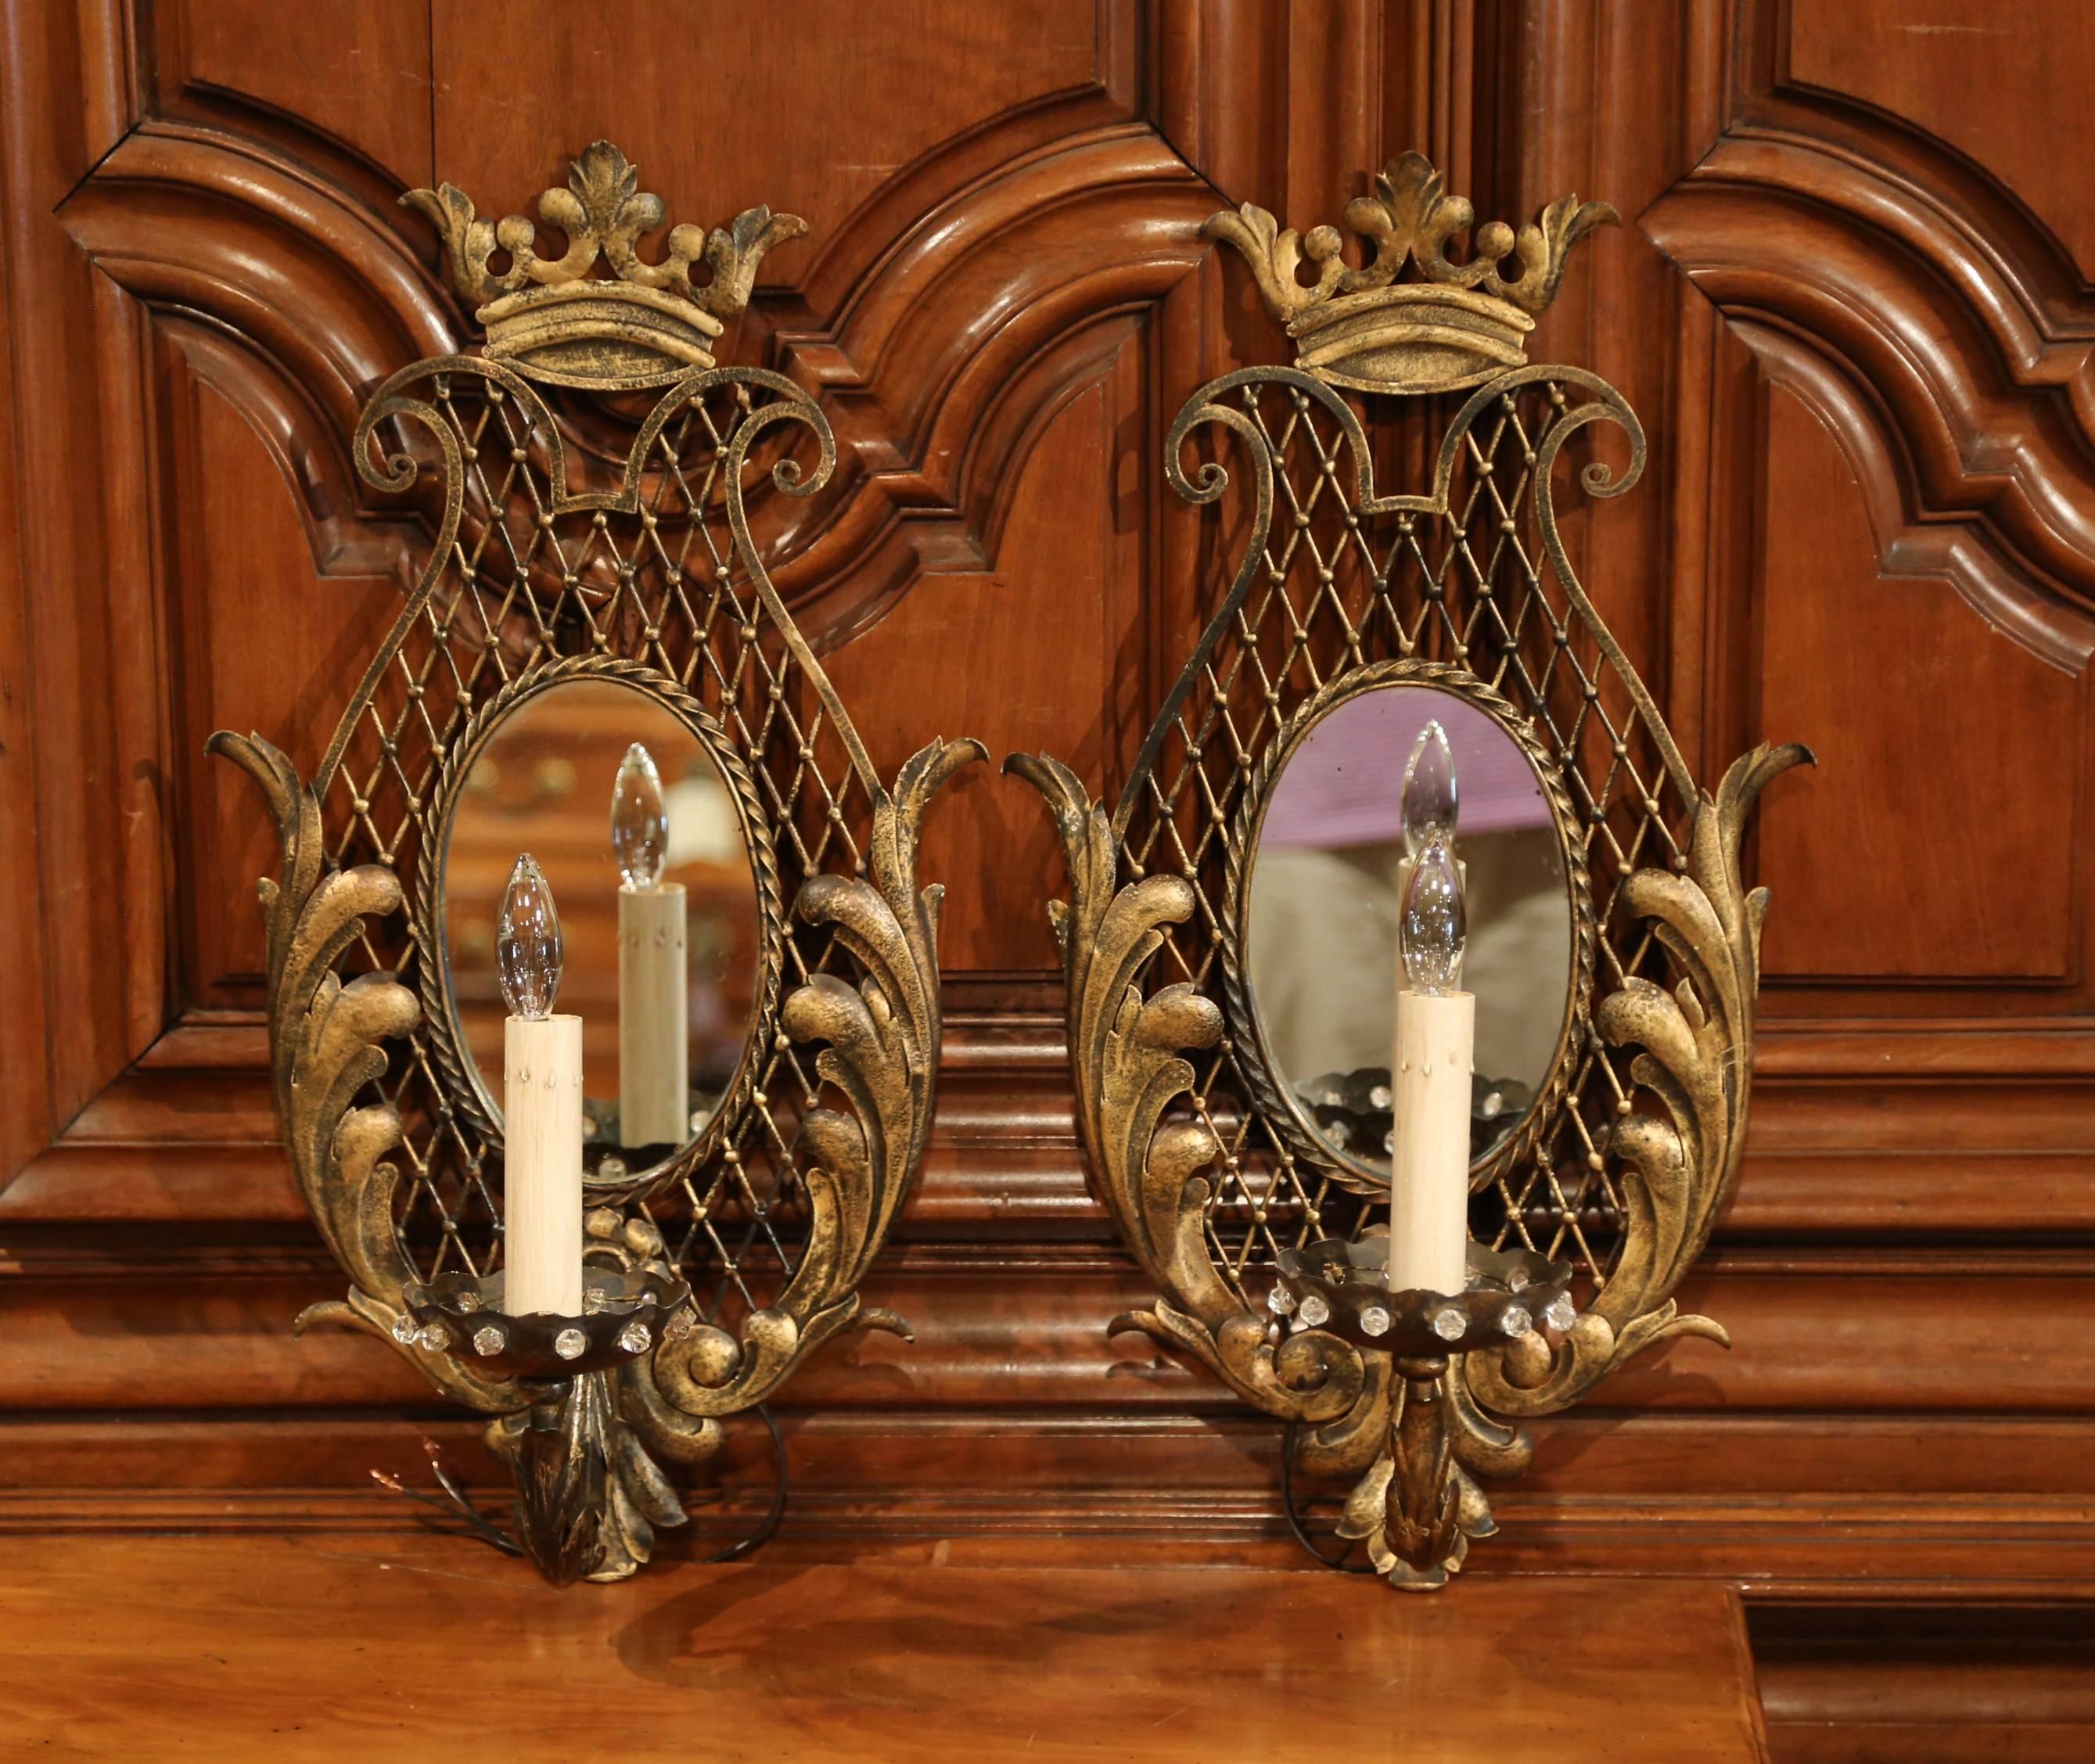 Pair of Early 20th Century French Iron Crystal and Mirrored Wall Sconces In Excellent Condition For Sale In Dallas, TX